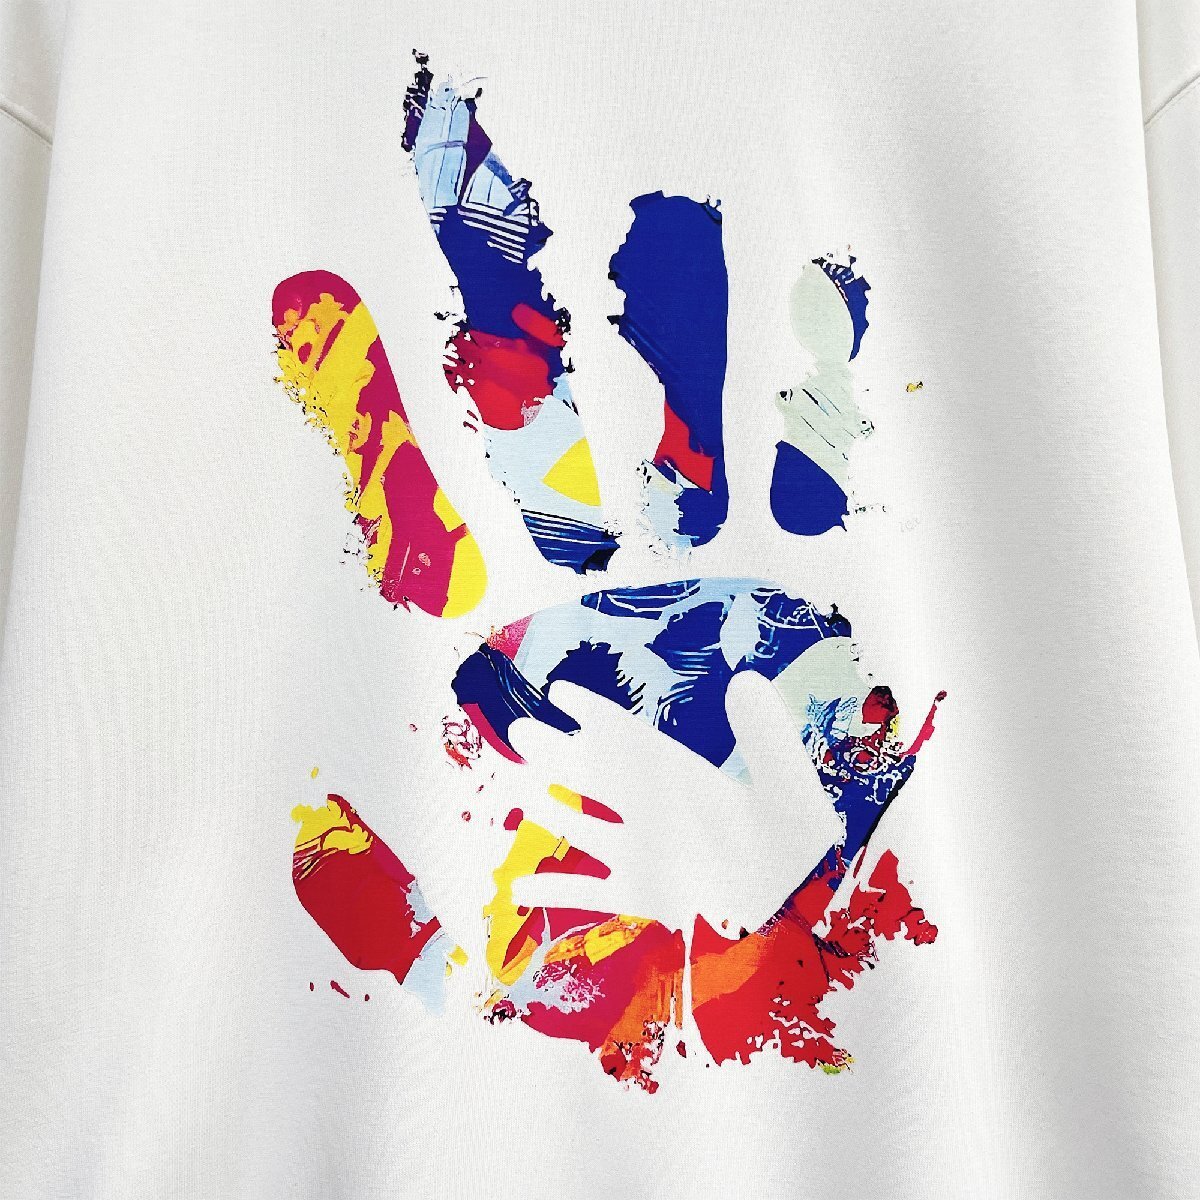  high grade regular price 4 ten thousand FRANKLIN MUSK* America * New York departure sweatshirt fine quality soft colorful . hand cut and sewn Street size 4